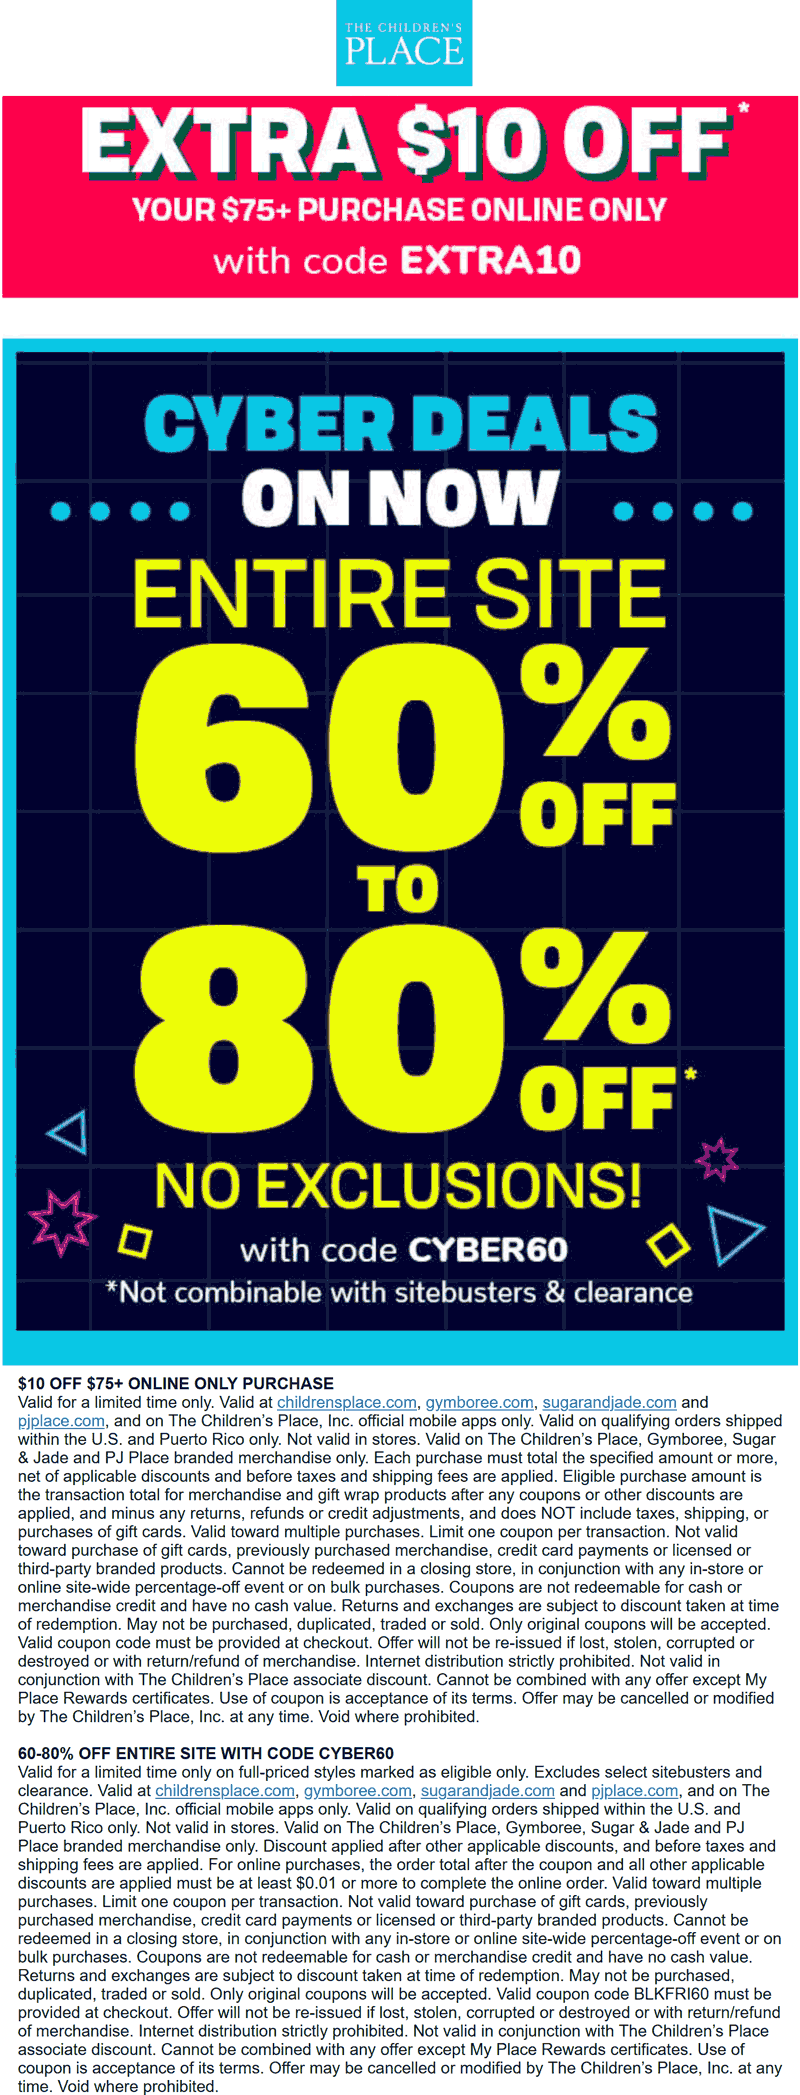 60-80% off everything + another $10 off $75 at The Childrens Place via promo code CYBER60 and EXTRA10 #thechildrensplace